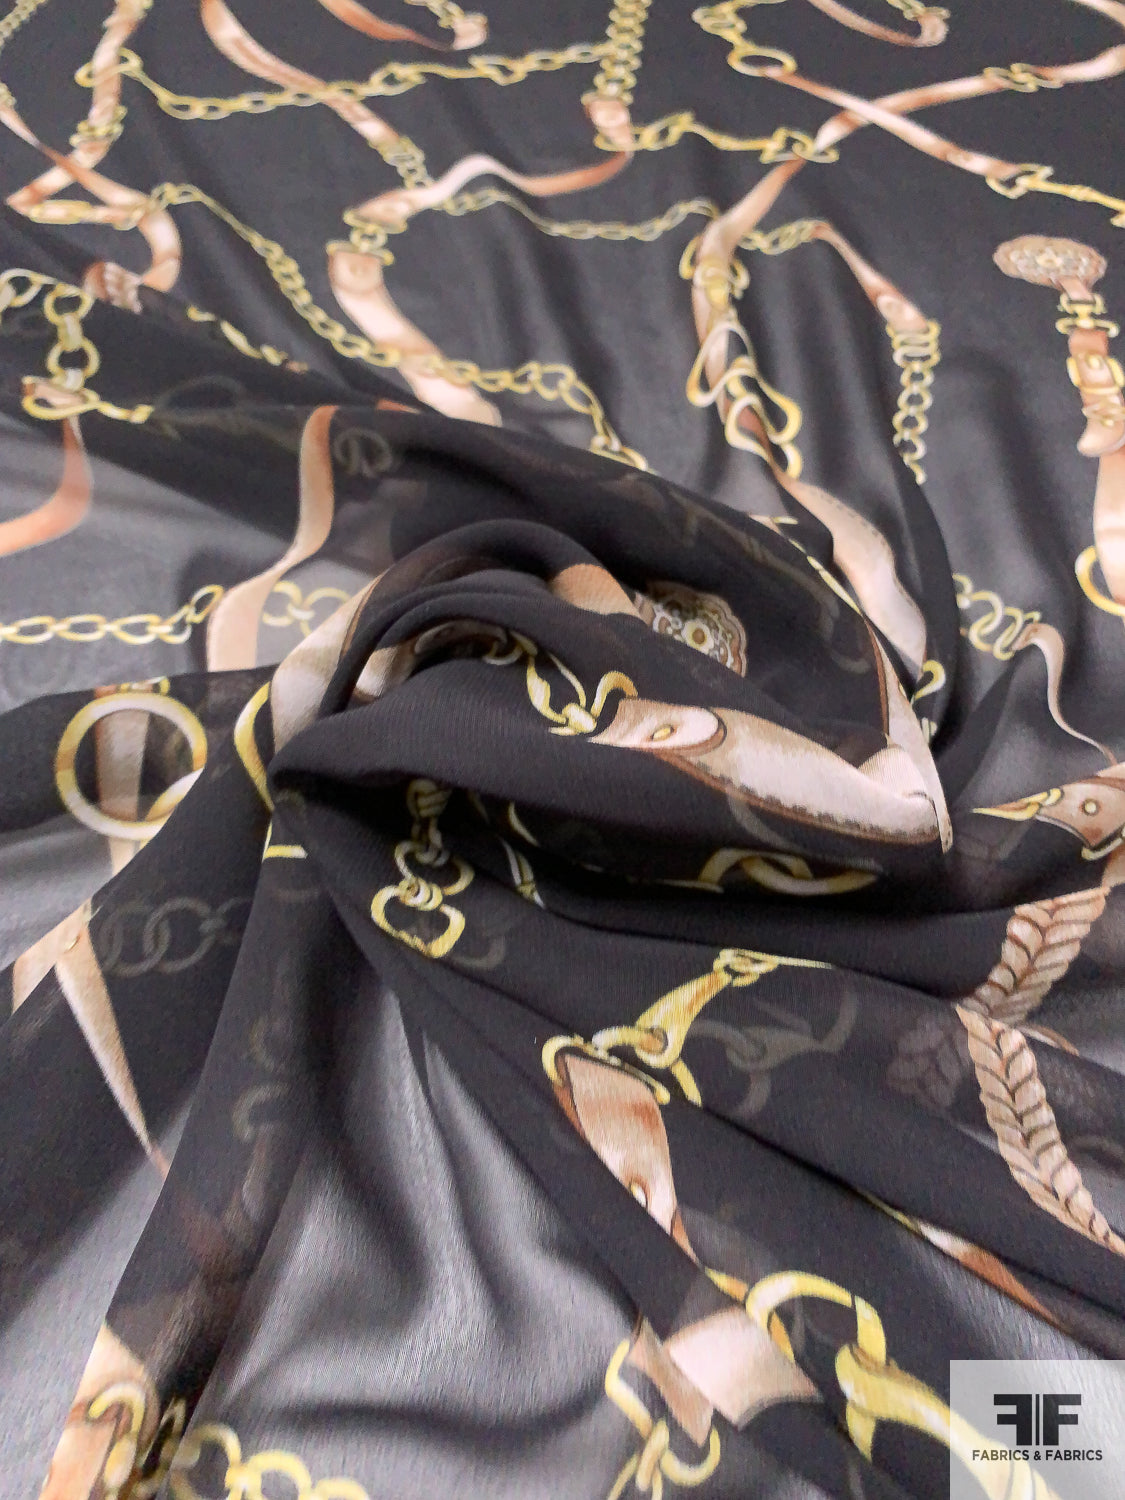 Belted Chains Printed Polyester Chiffon - Black / Gold / Tan